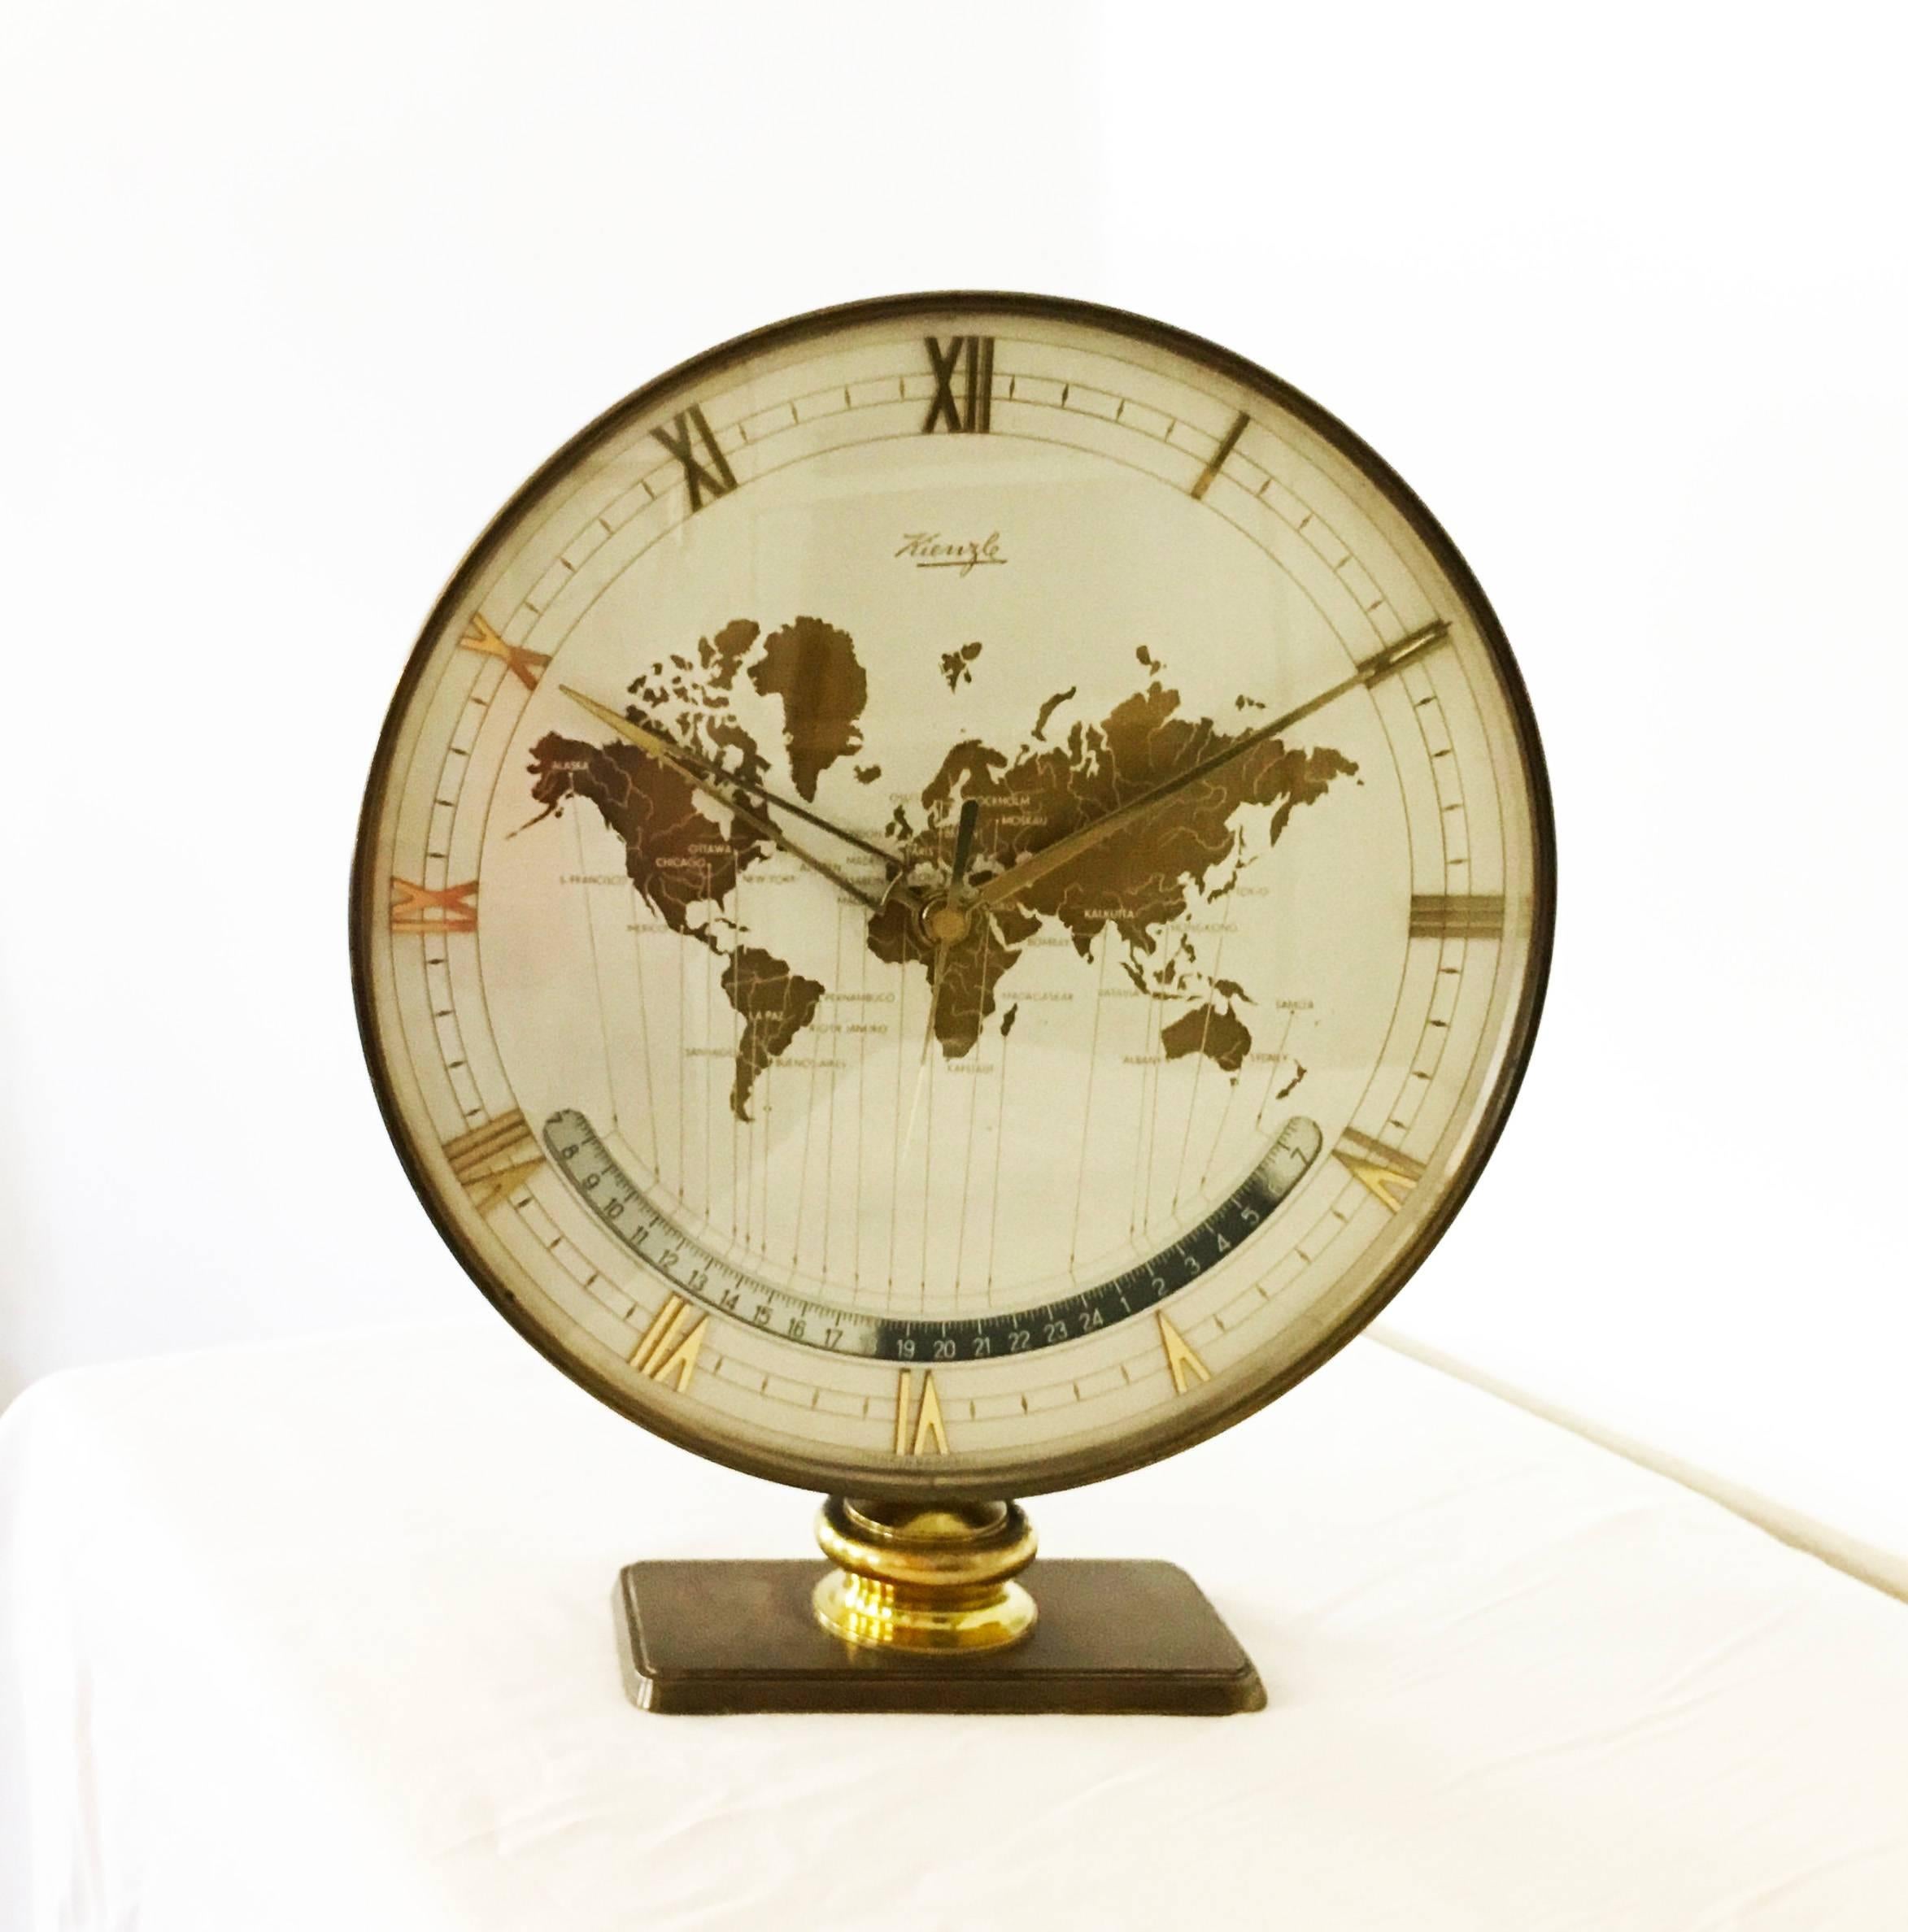 Kienzle automatic world timer zone clock.
An exclusive big table clock from Ø 26cm wonderful clocks face with world map and world time zones, glass, the heavy case and base are of solid brass. 
Original condition but the mechanical movement was